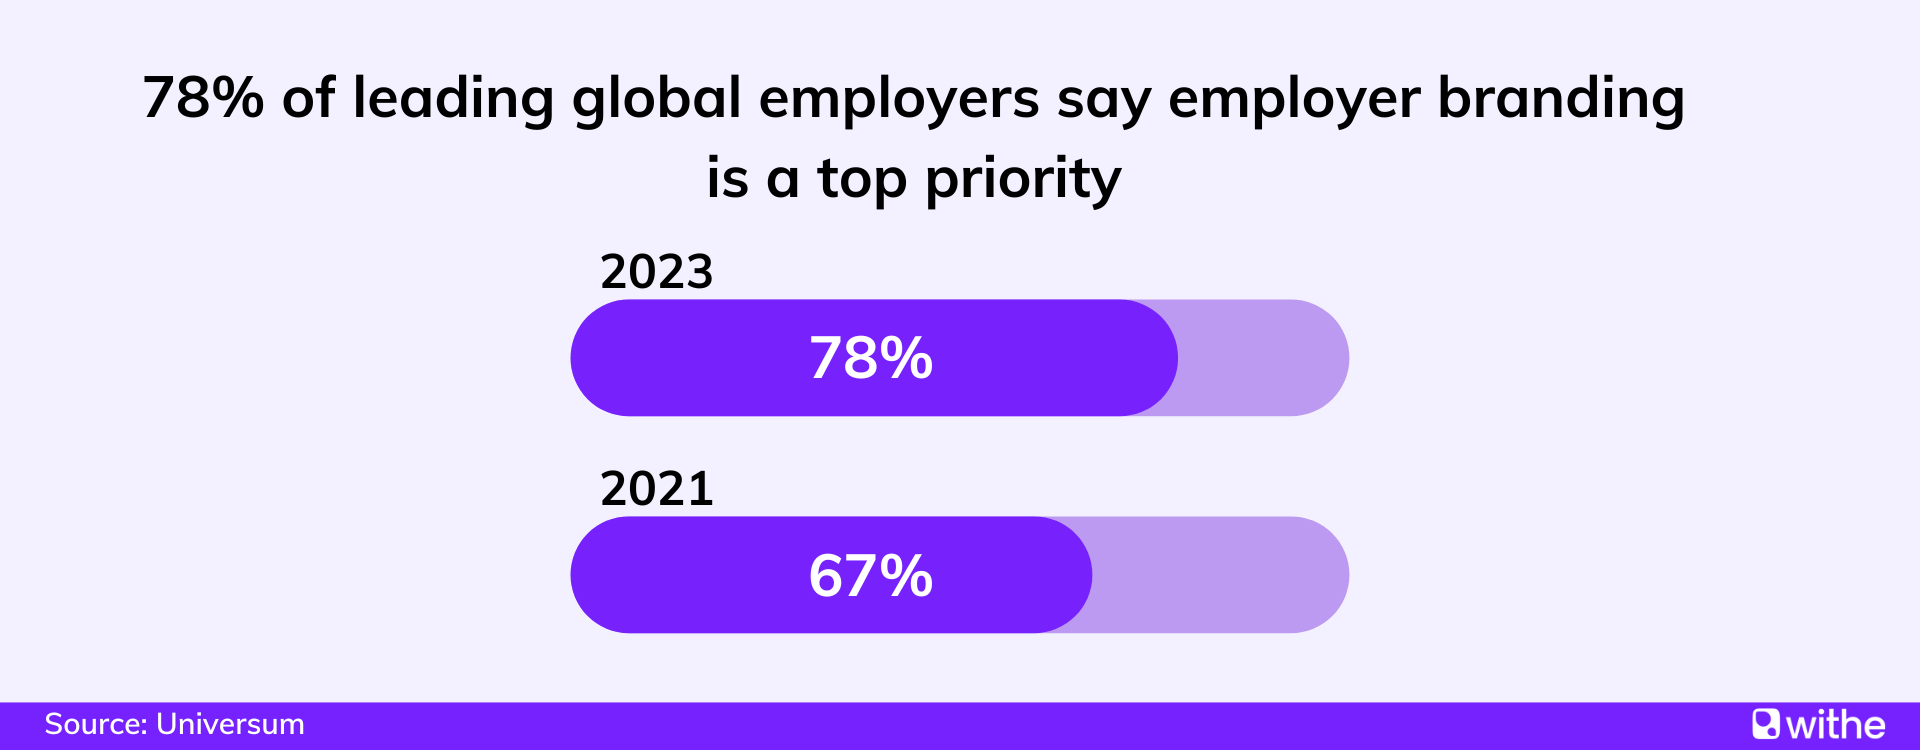 Employer brand statistics - 78% of leading global employers say employer branding is a top priority